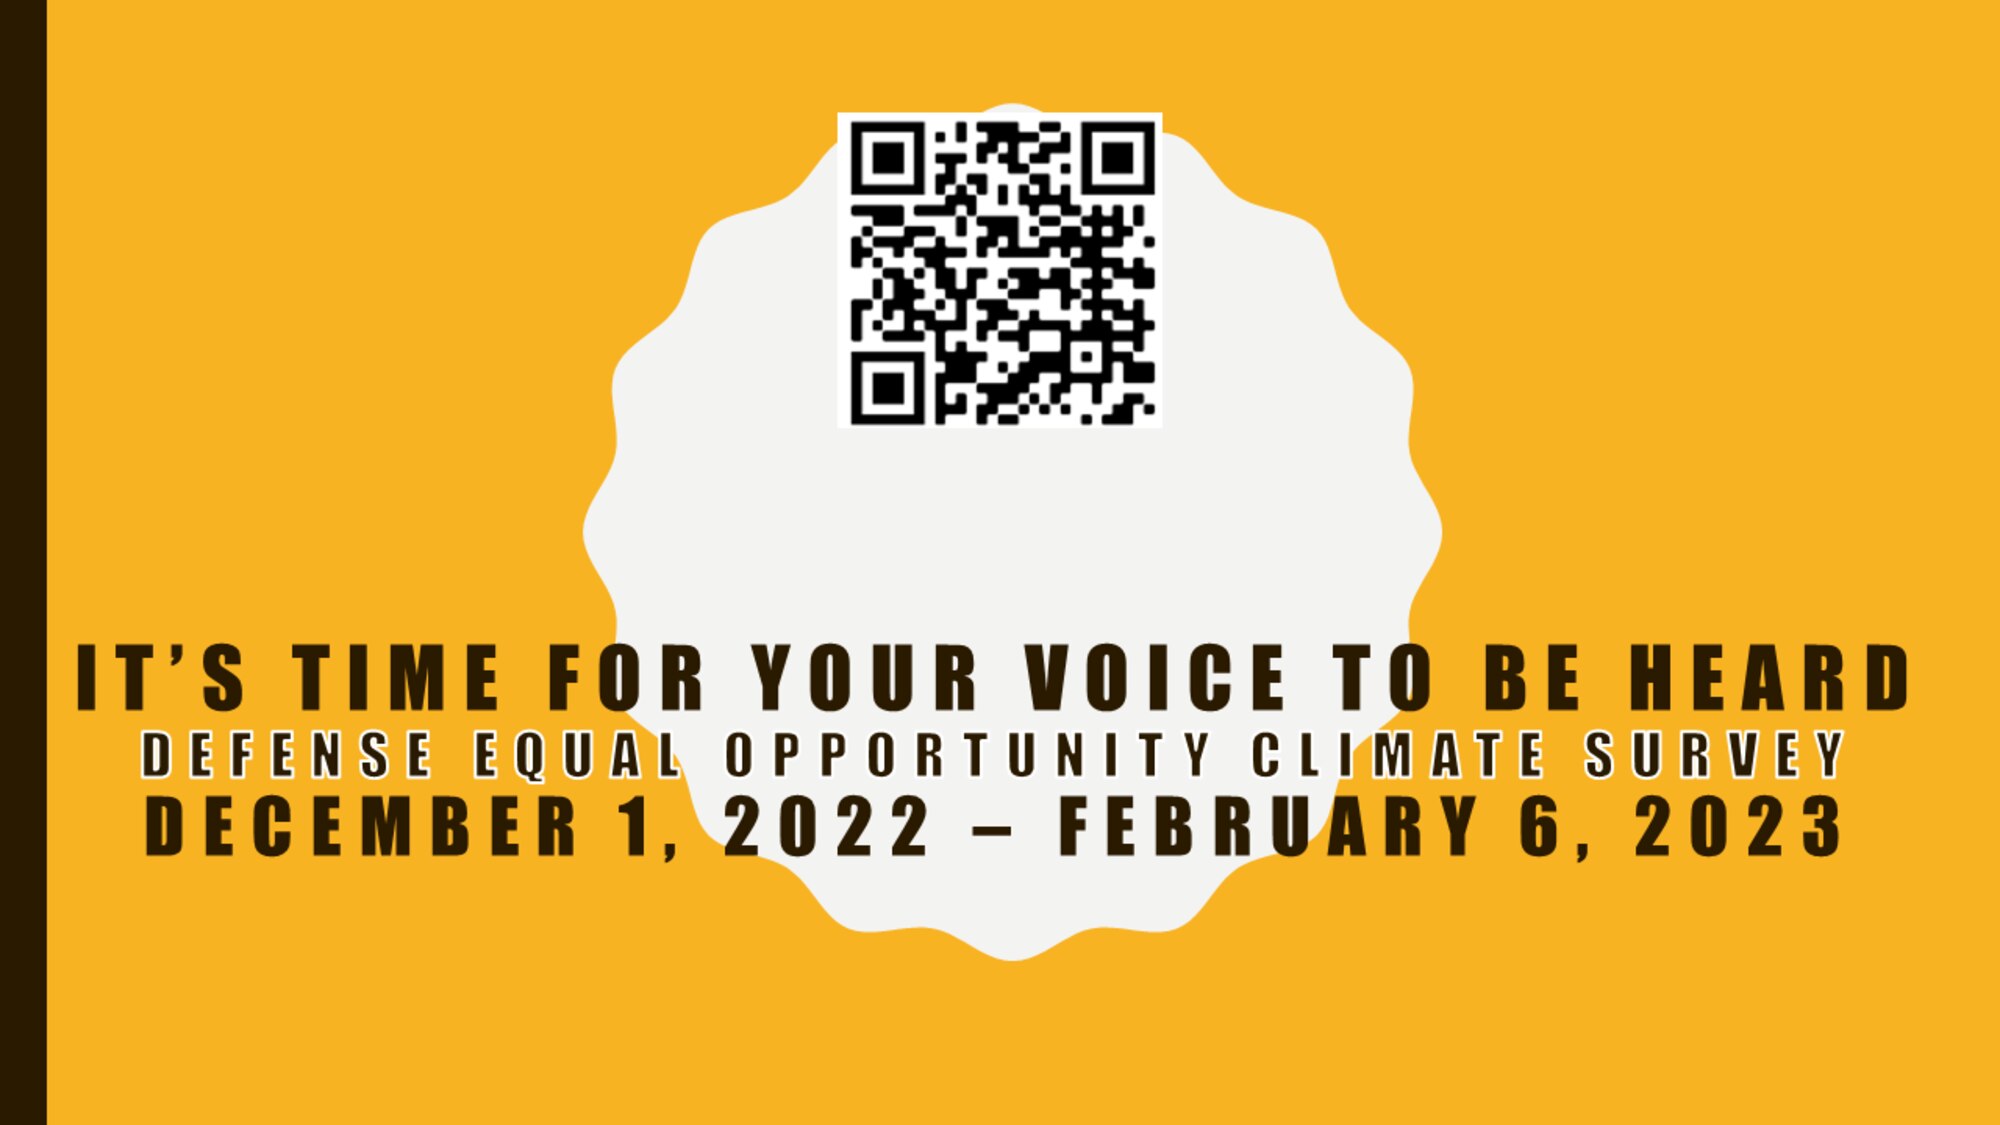 A yellow flyer with black text and a QR code describes the Defense Equal Opportunity Climate Survey. A member of the 108th Wing will need to access their email to get their unique pin to take the survey. The survey is open from December 1, 2022 to February 6, 2023.